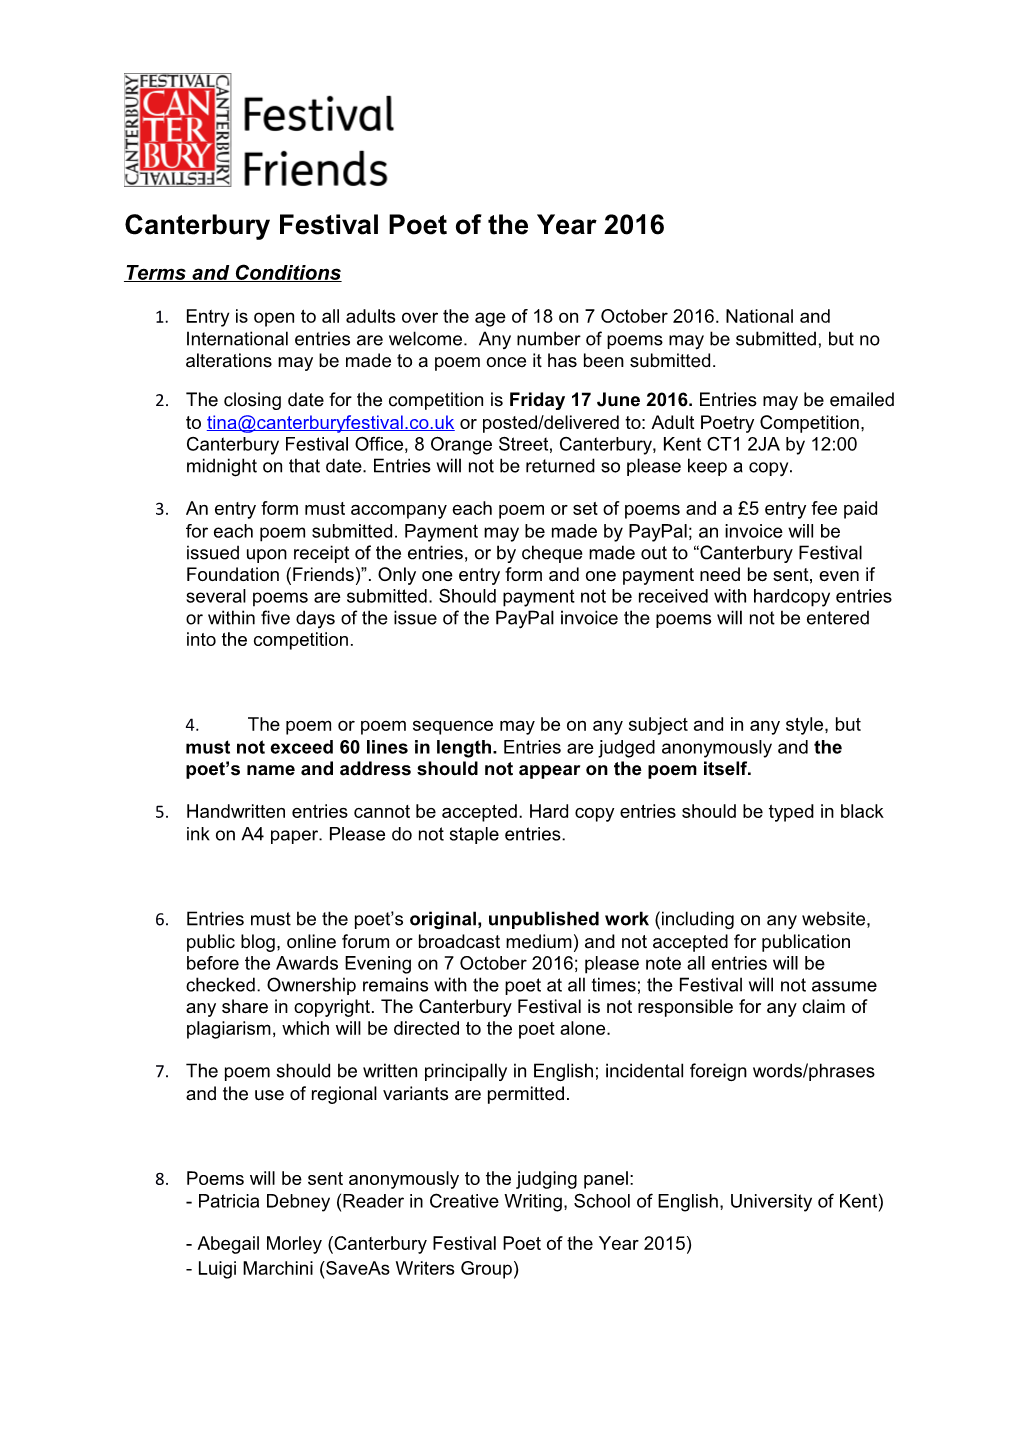 2014 Canterbury Festival Poet of the Year